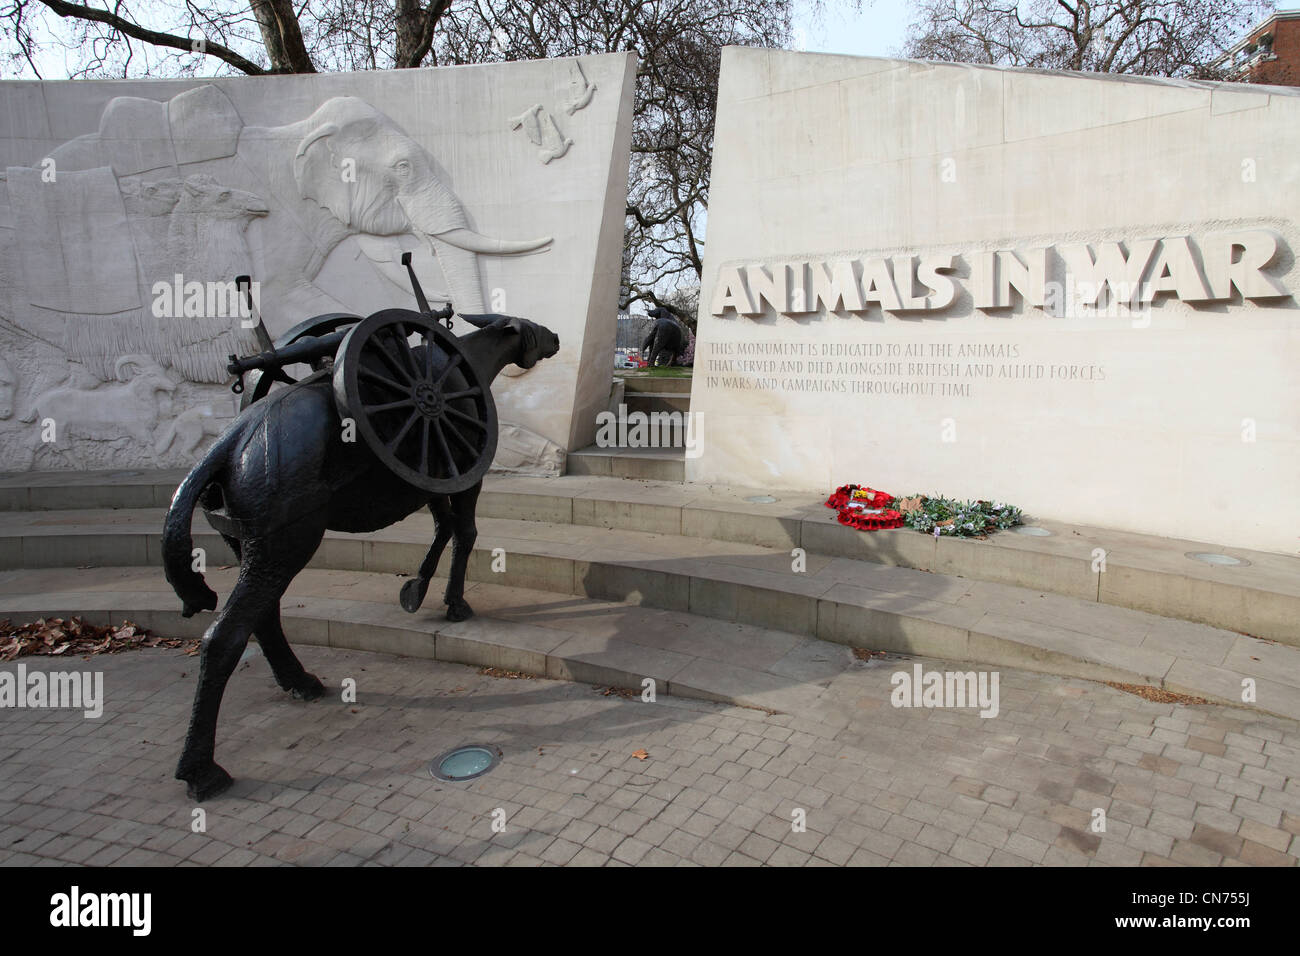 The Animals in War monument, sculpted by David Backhouse, in London, England. Stock Photo